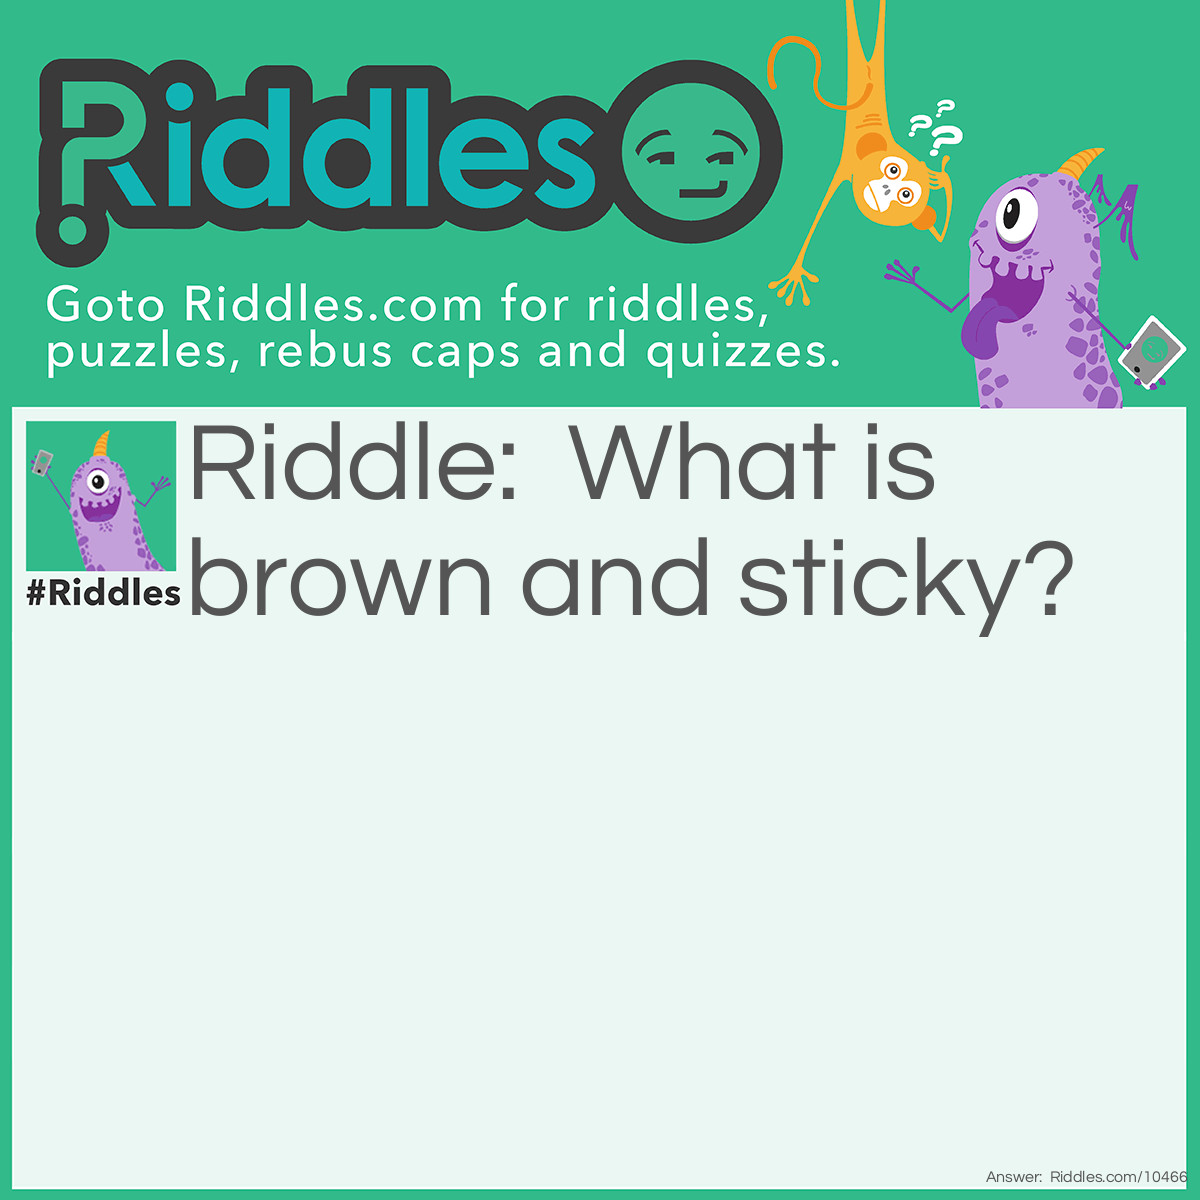 Riddle: What is brown and sticky? Answer: A stick.